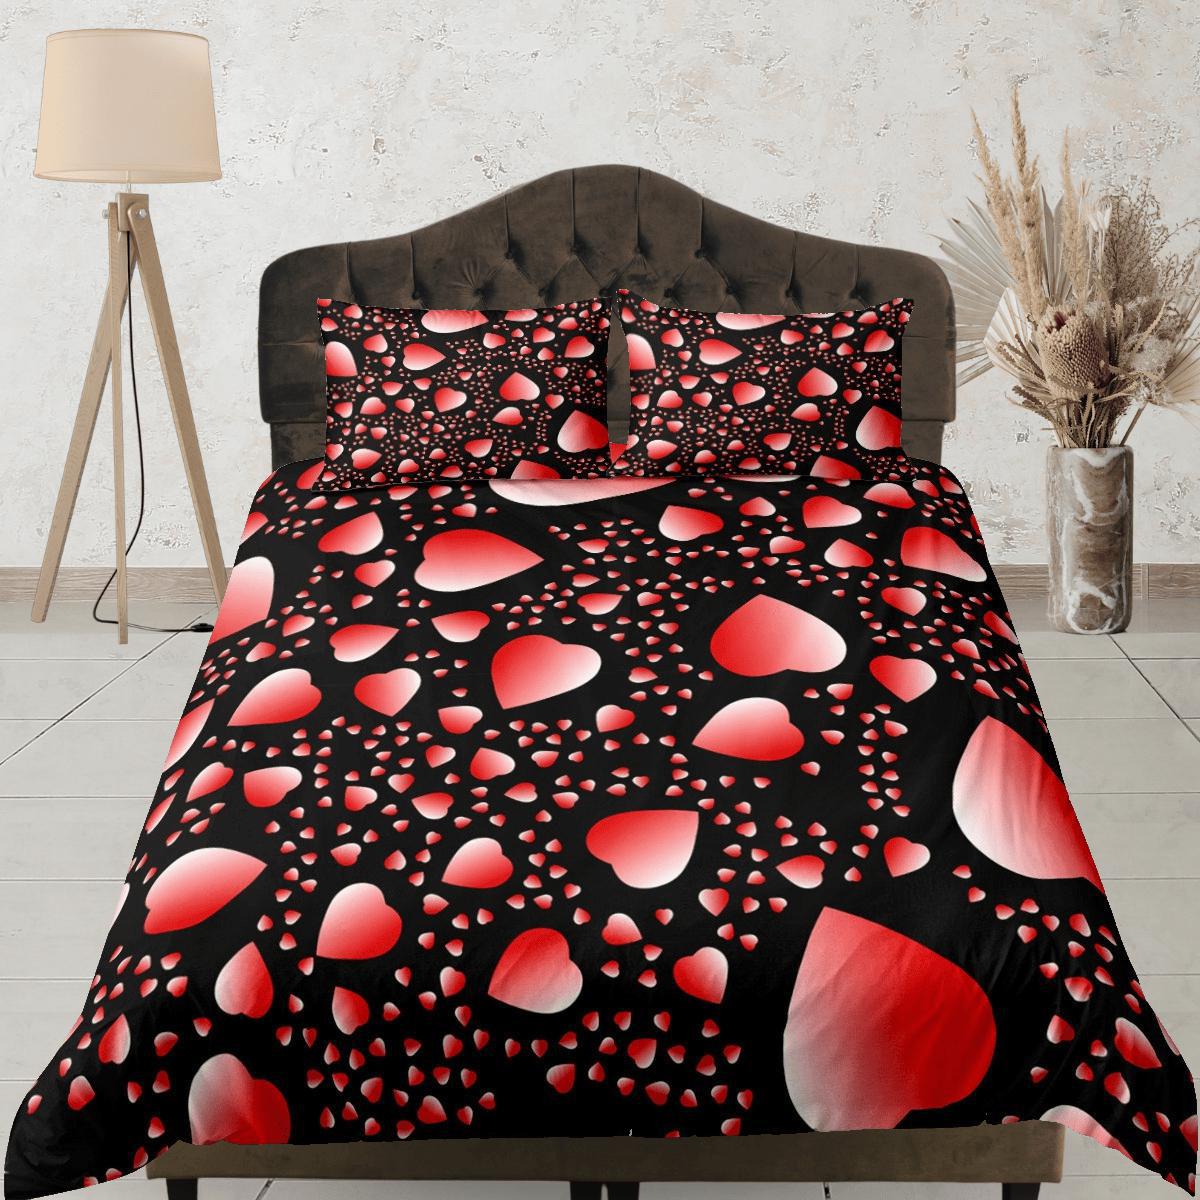 daintyduvet Red Hearts Duvet Cover Set Bedspread, Lovers Bedding Pillowcase Comforter Cover, Bedroom for Couples